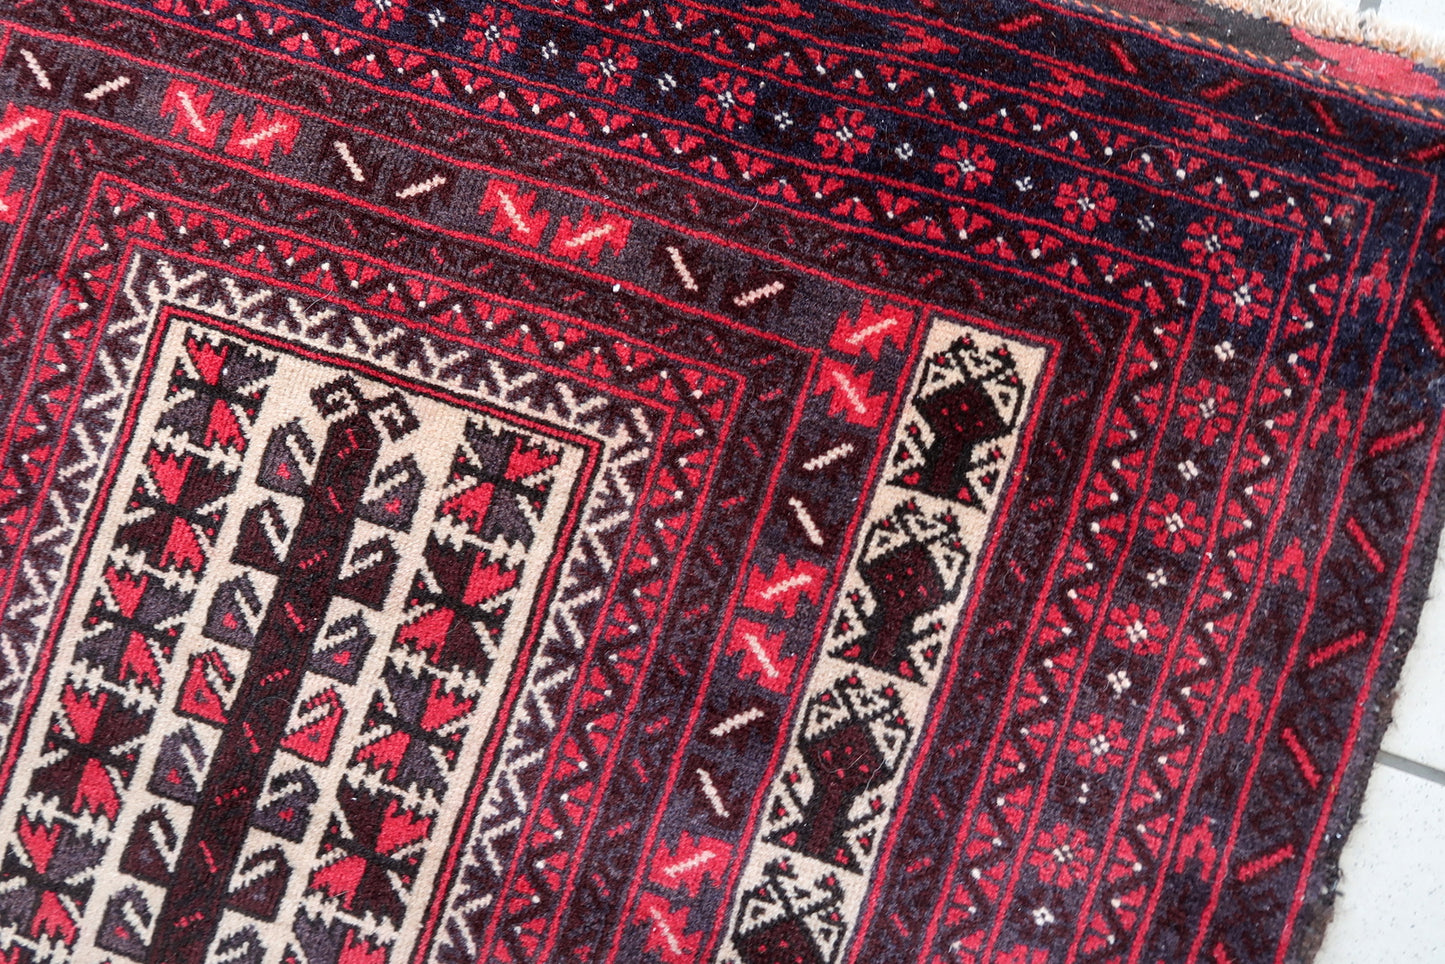 Close-Up of the Rug's Central Design